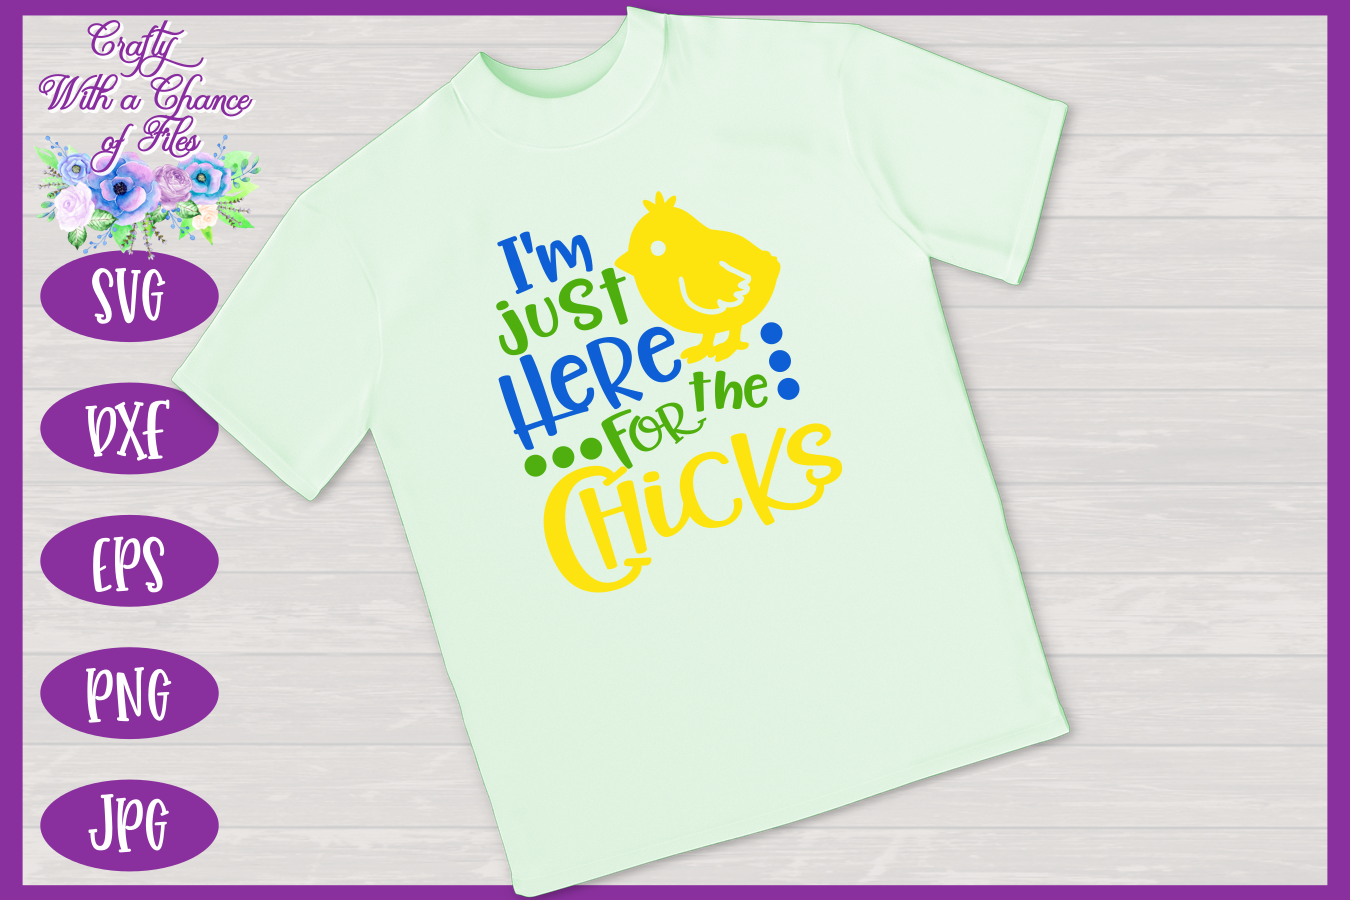 Easter Svg I M Just Here For The Chicks Svg Boys Shirt Svg By Crafty With A Chance Of Files Thehungryjpeg Com